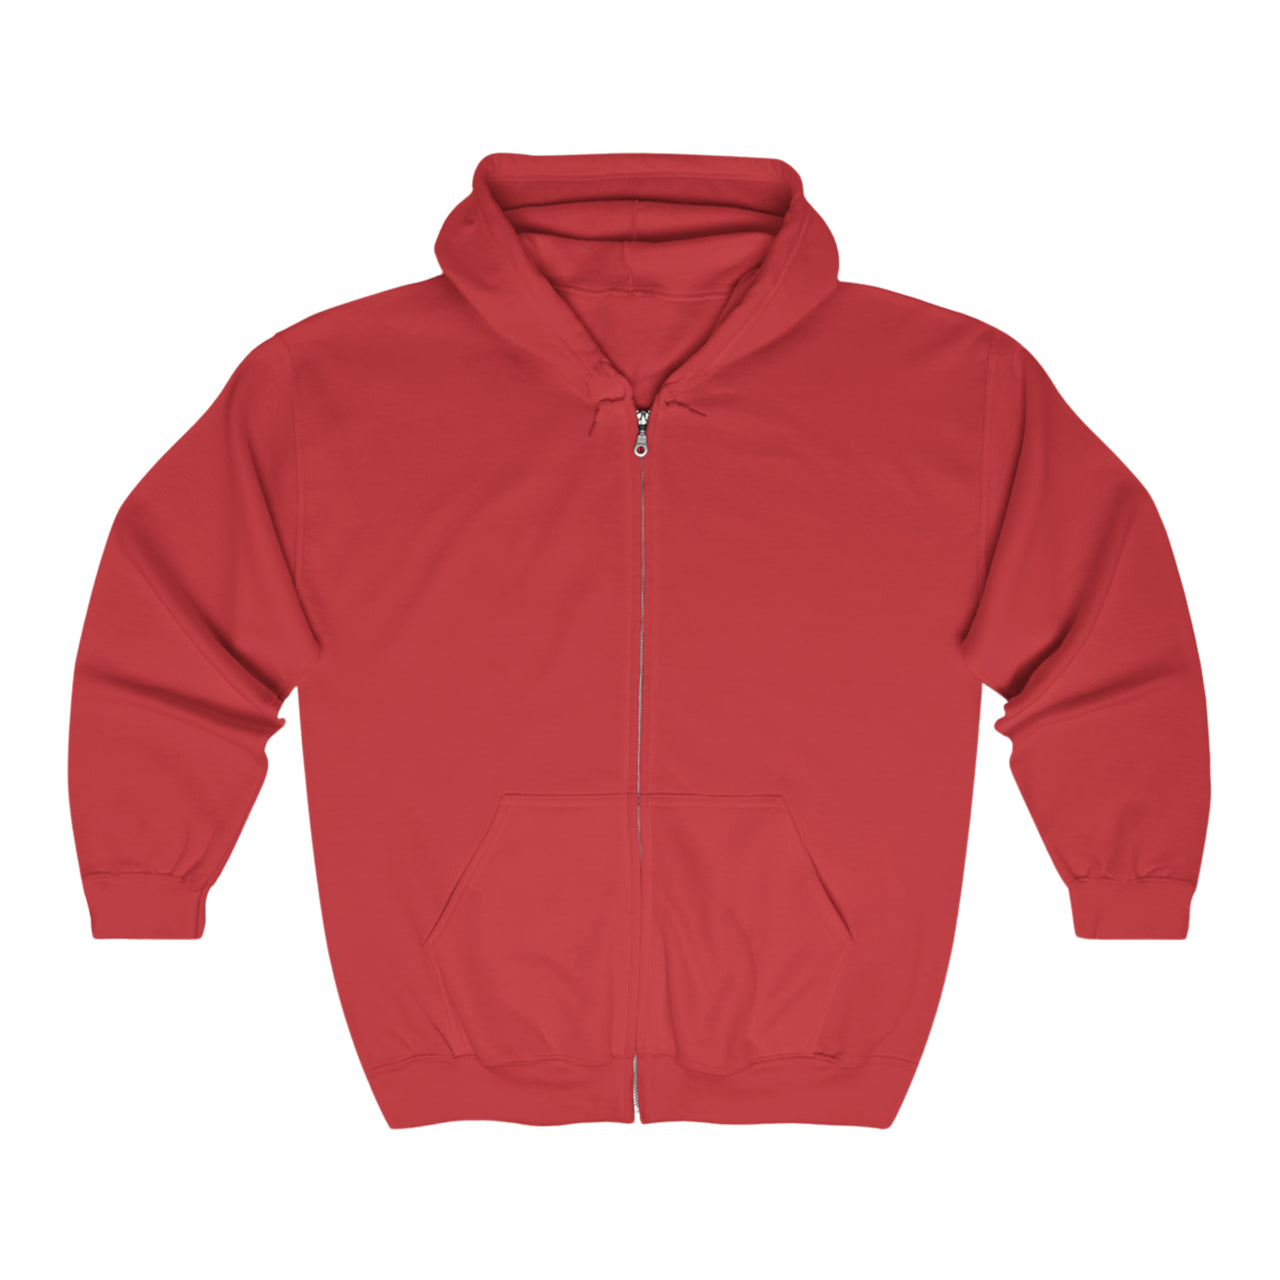 America First Full Zip Hooded Sweatshirt-Red-no graphic on front